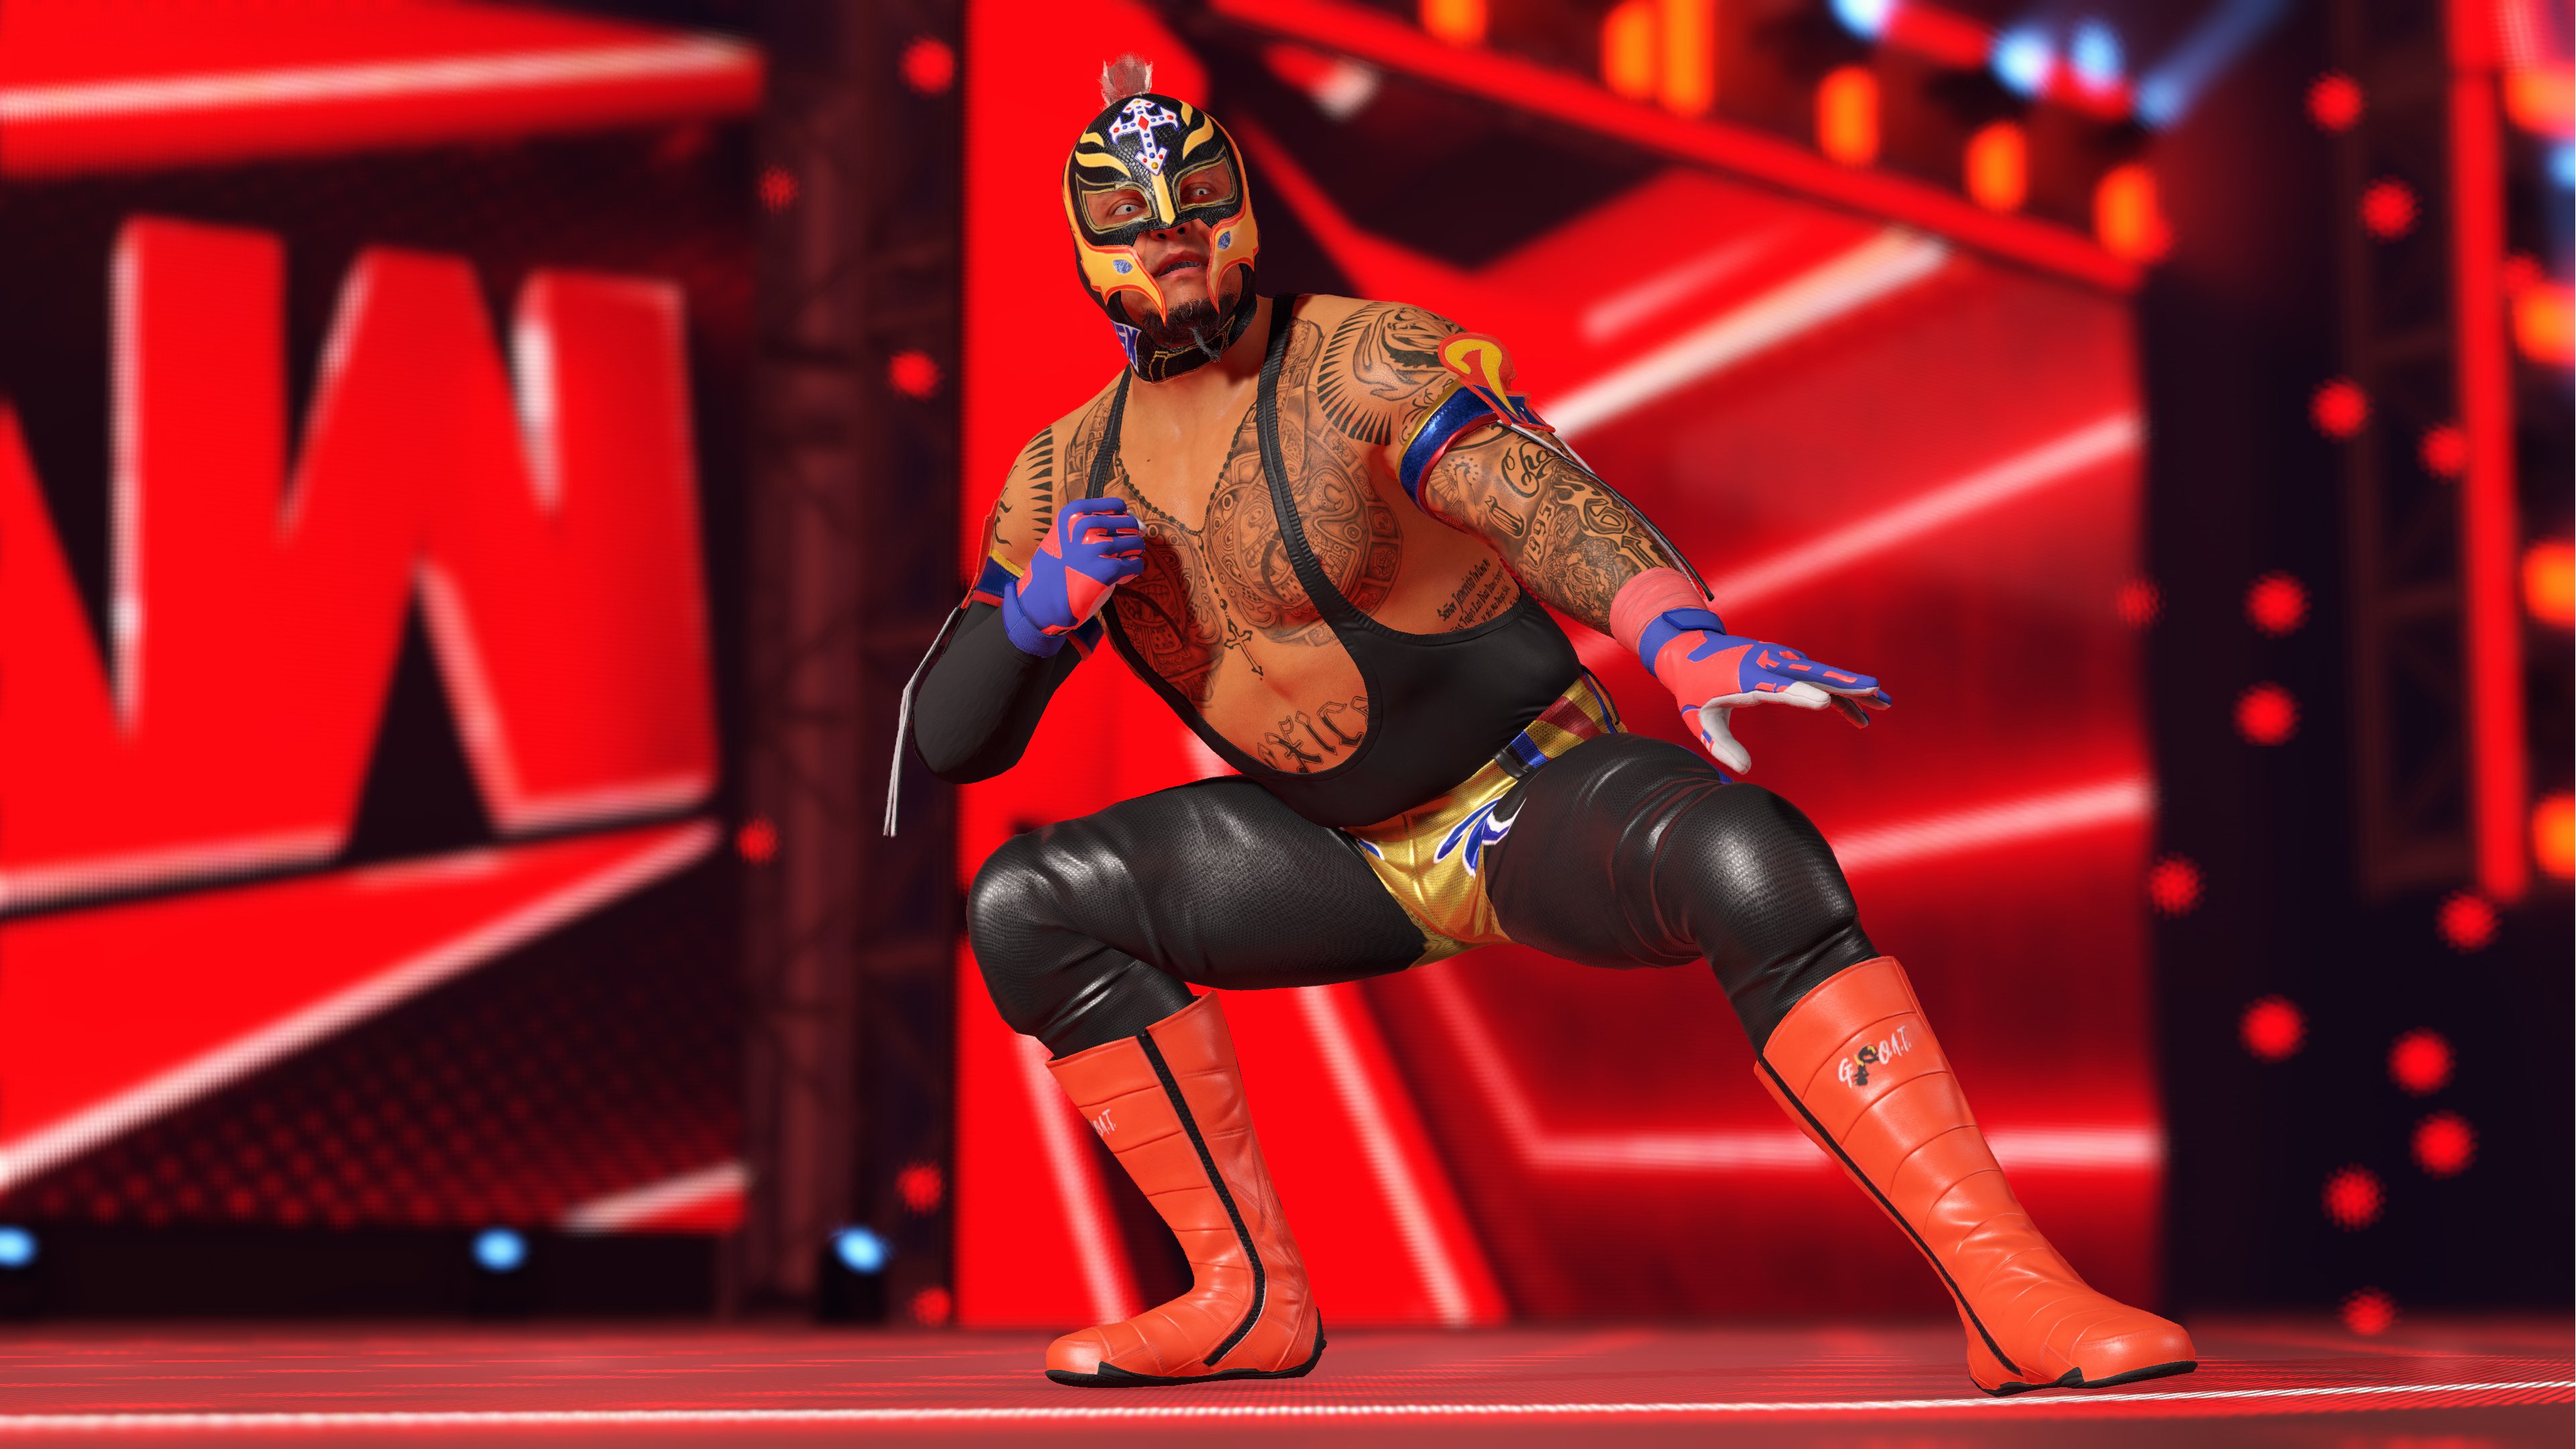 Wwe 2K22 wallpapers for desktop, download free Wwe 2K22 pictures and  backgrounds for PC 